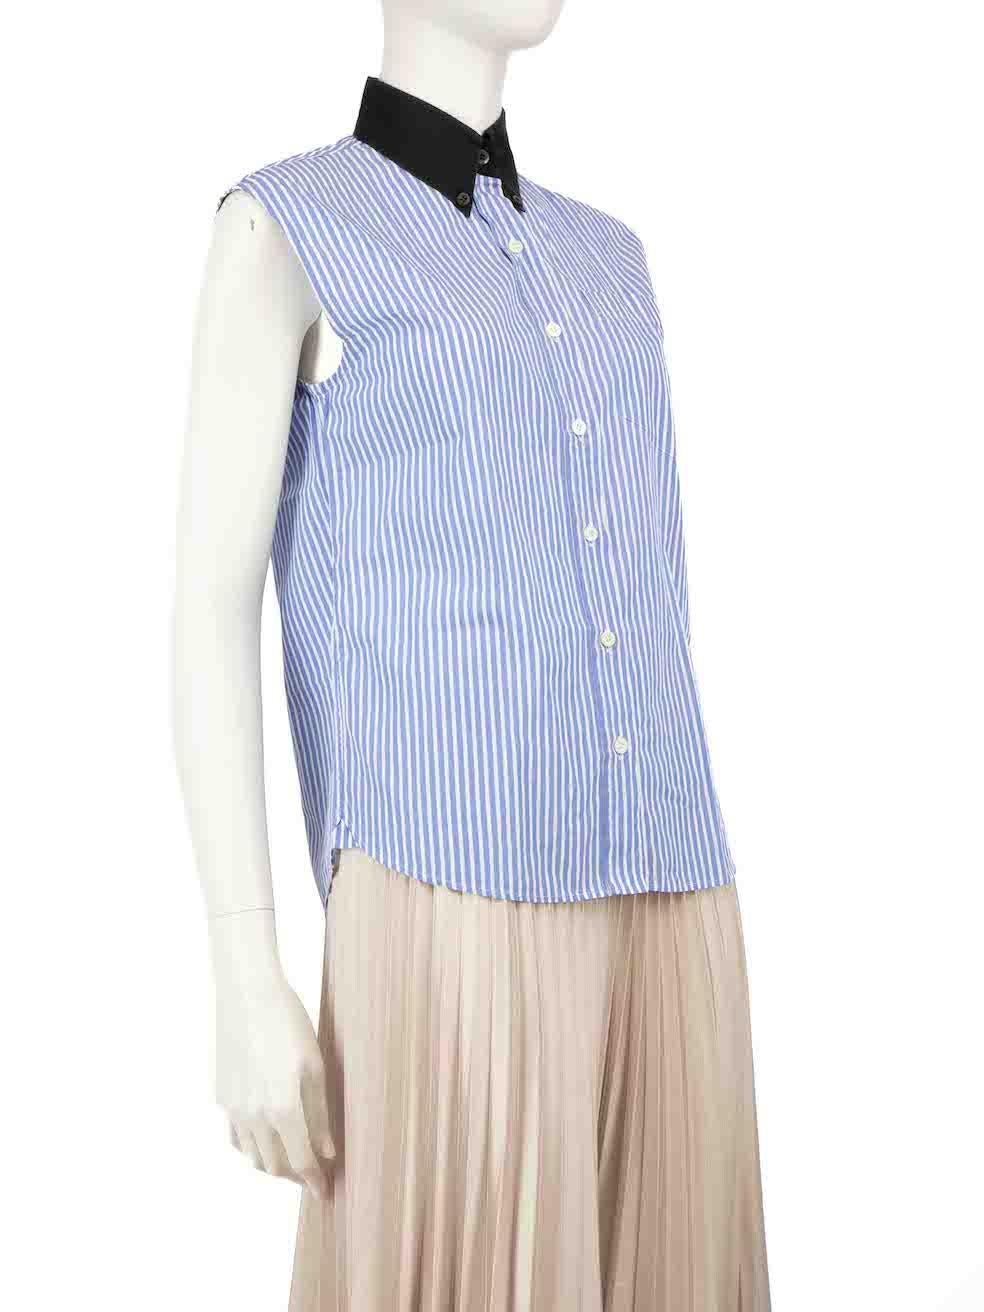 CONDITION is Very good. Minimal wear to the shirt is evident. Minimal discolouration to the collar on this used Prada designer resale item.
 
 
 
 Details
 
 
 Blue
 
 Cotton
 
 Sleeveless shirt
 
 Striped pattern
 
 Black collar
 
 1x Front pocket
